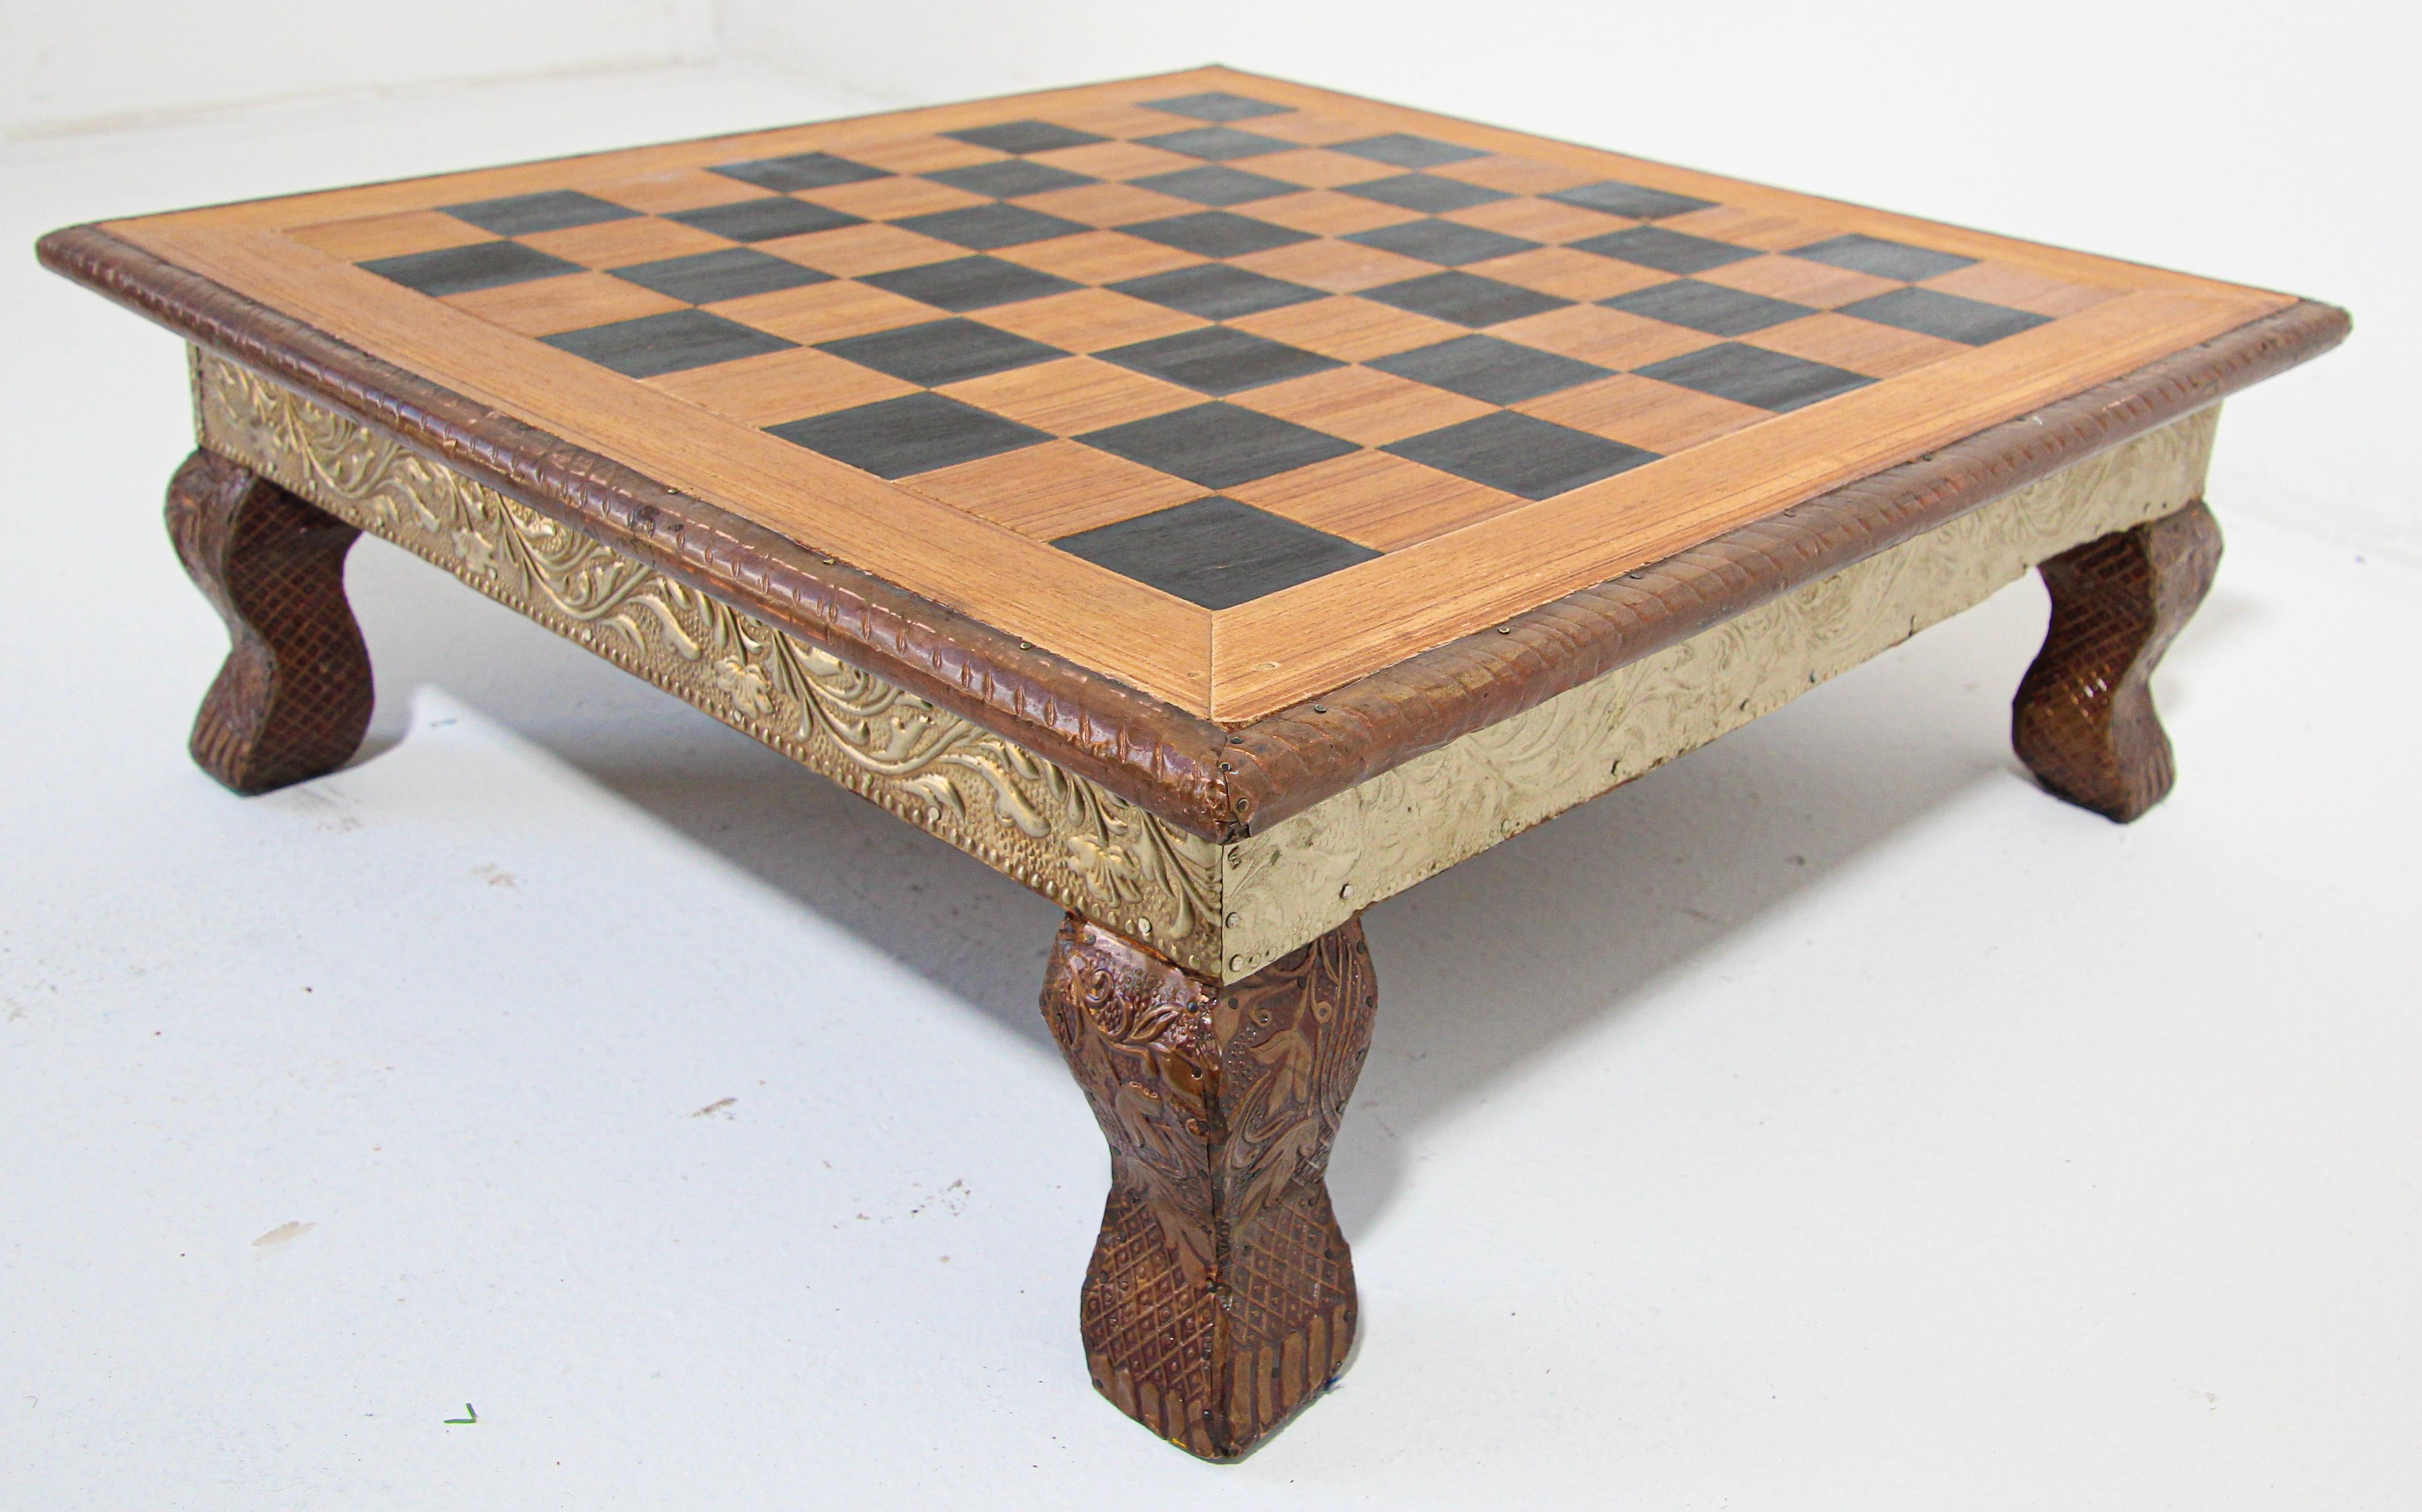 The board is nicely carved with Rajasthani designs at the rim, the sides and feet are covered with clad silver metal hammered with Moorish Raj designs. 
In good vintage condition. 
Wood table with board size 7 inches tall, 20 inches square framed,